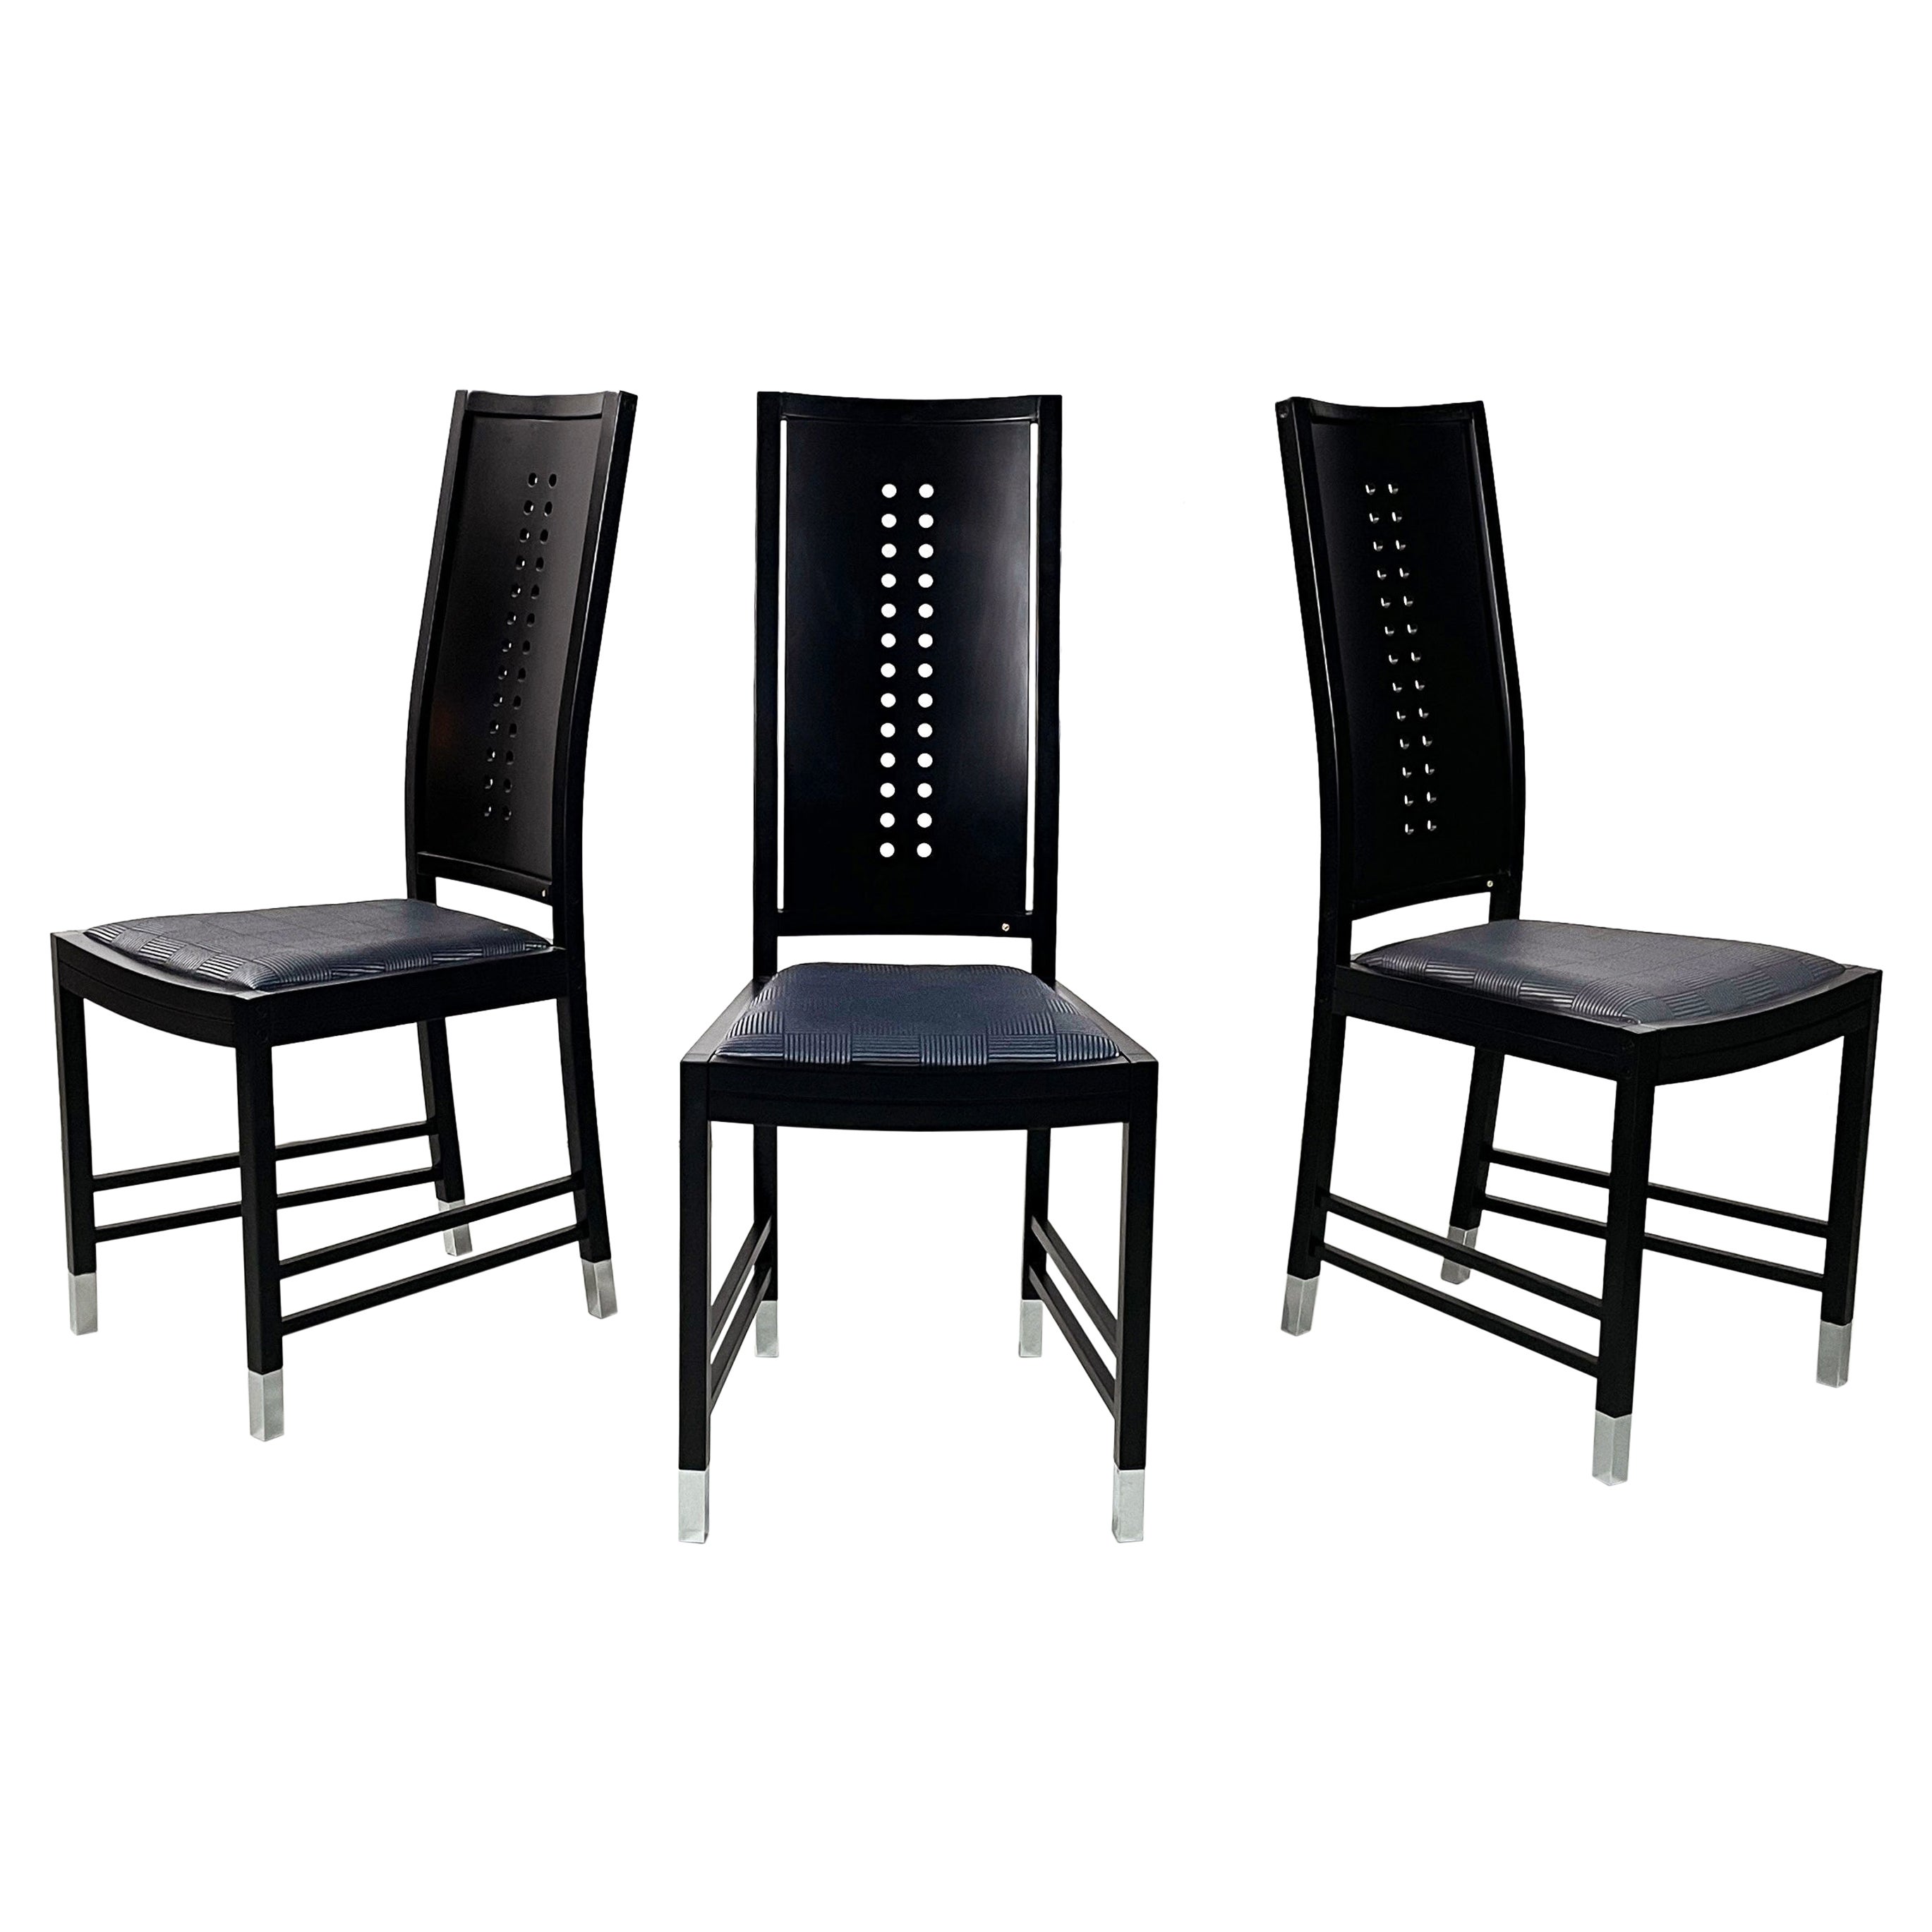 Austrian modern Chairs in black wood by Ernst W. Beranek for Thonet, 1990s For Sale